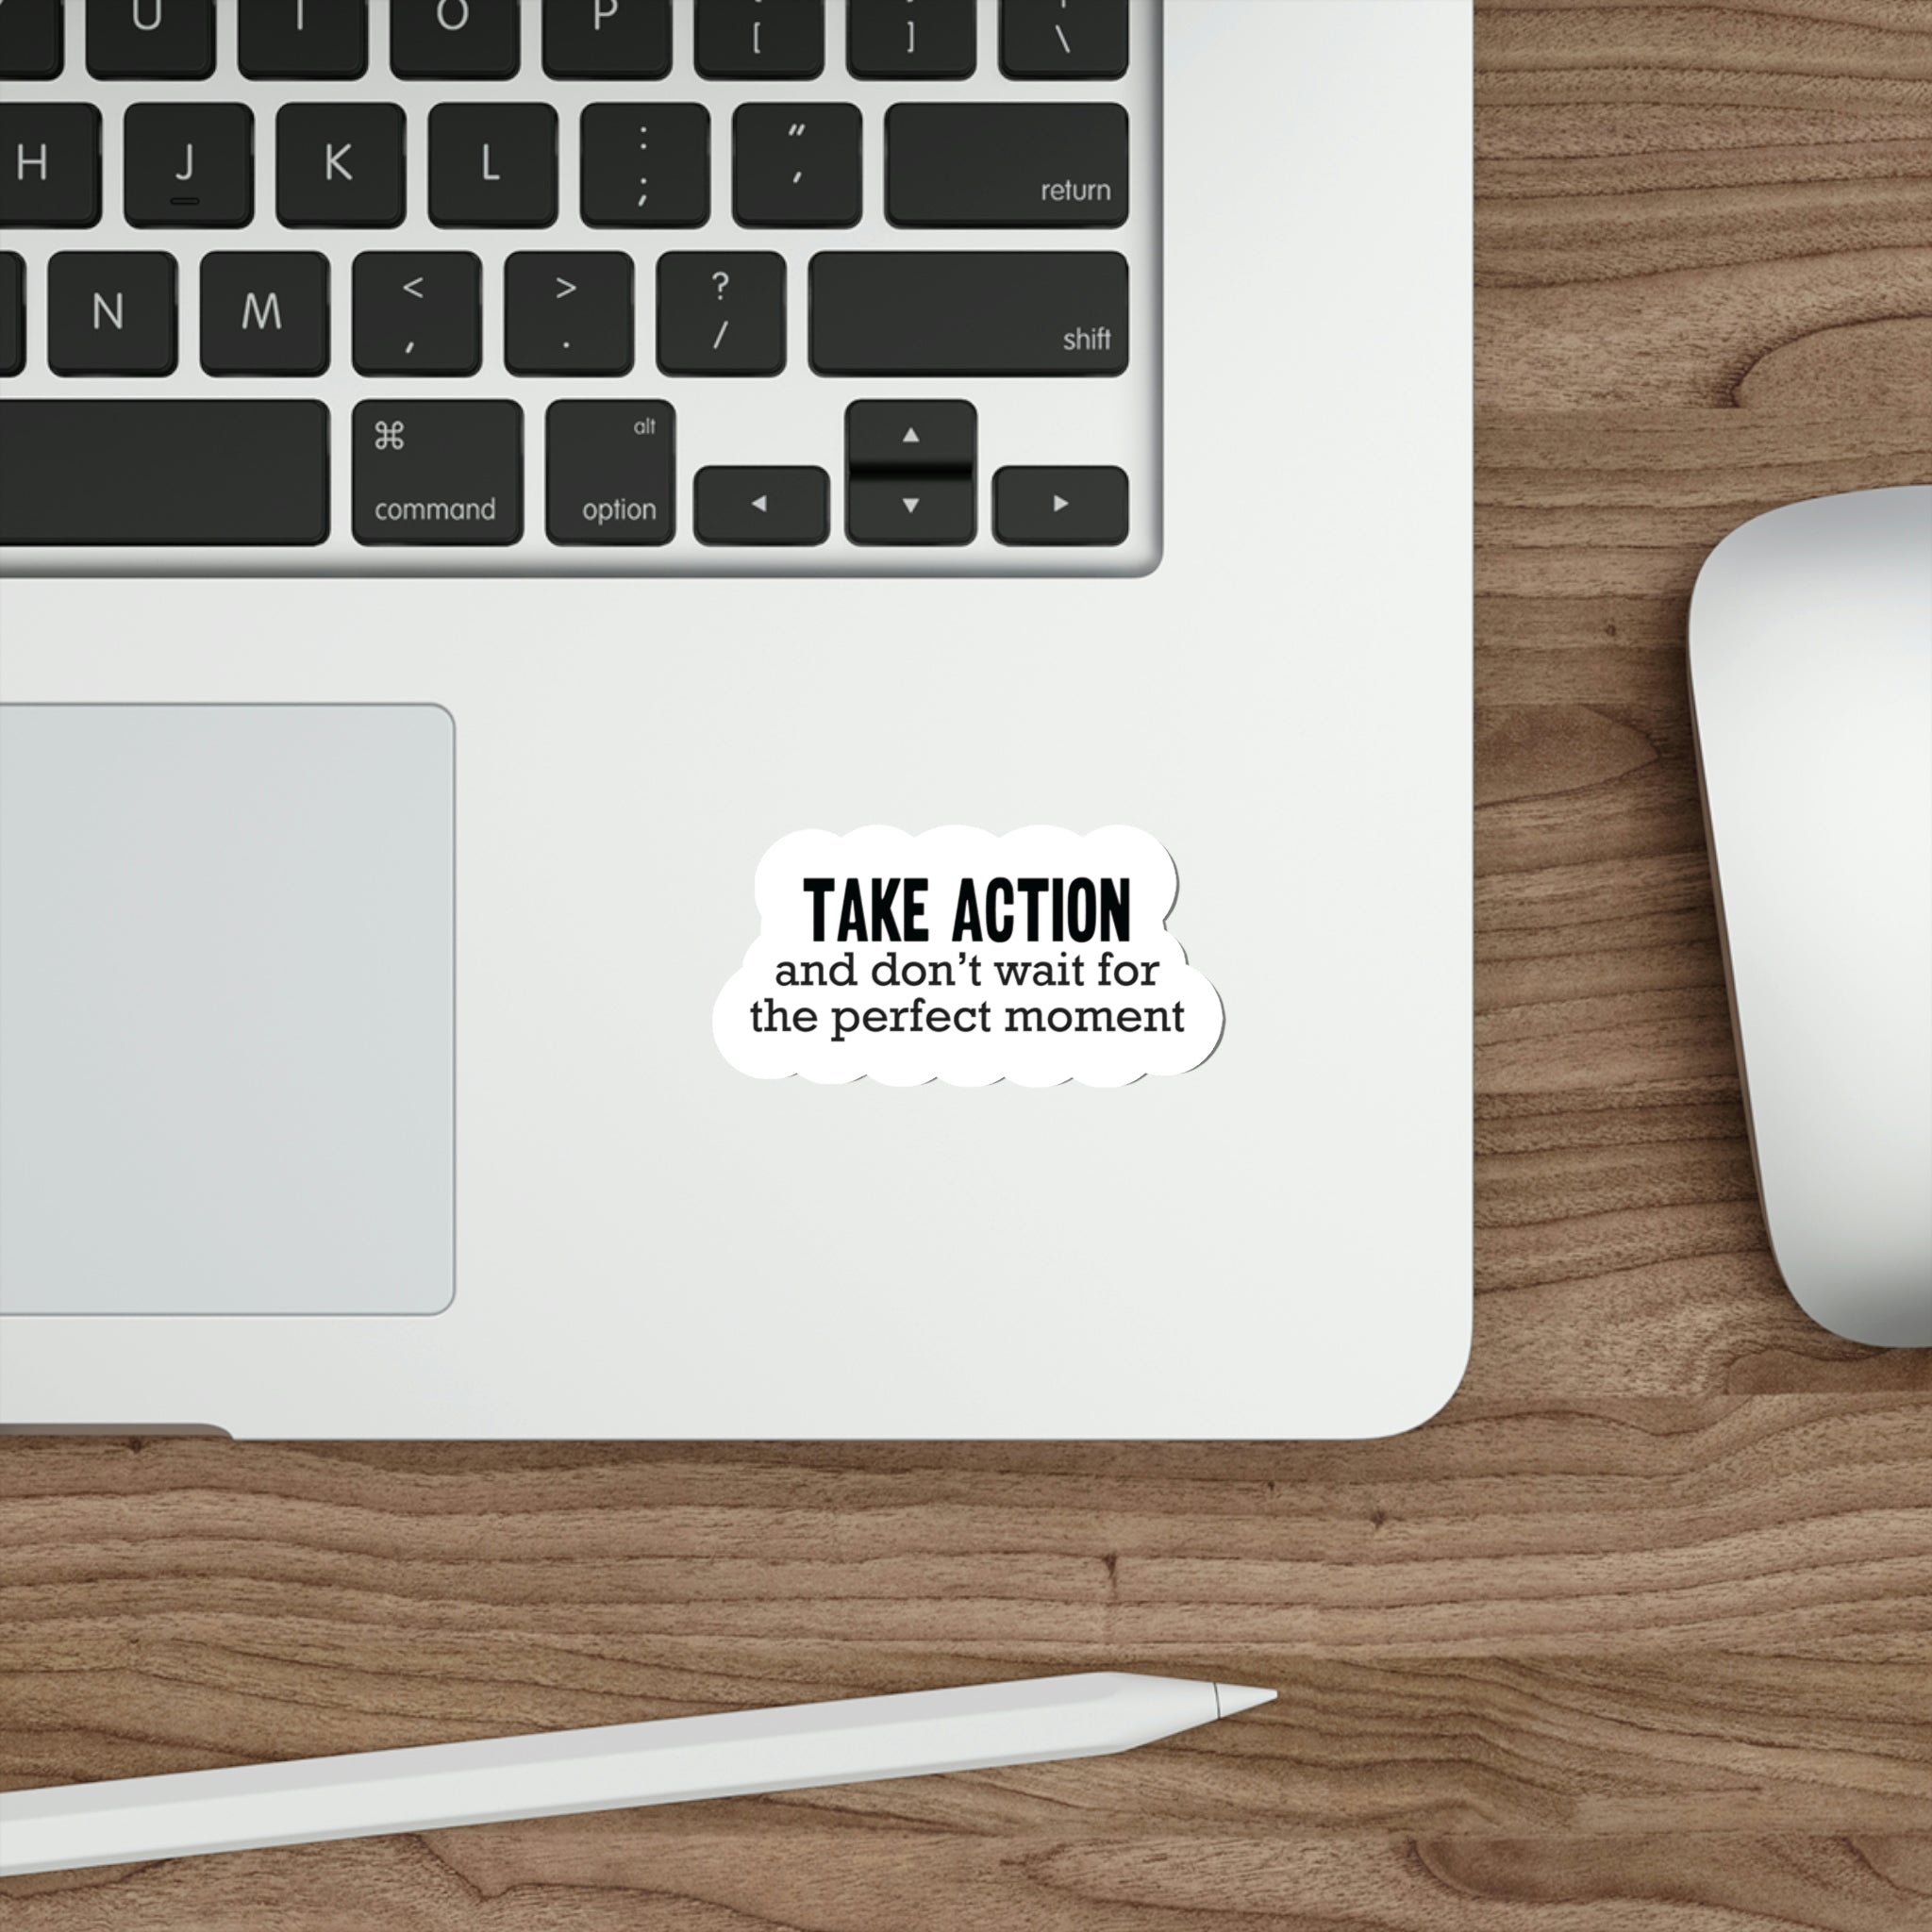 Inspiring Sticker to Remind You of the Power of Taking Action | Shop #size_3x3-inches